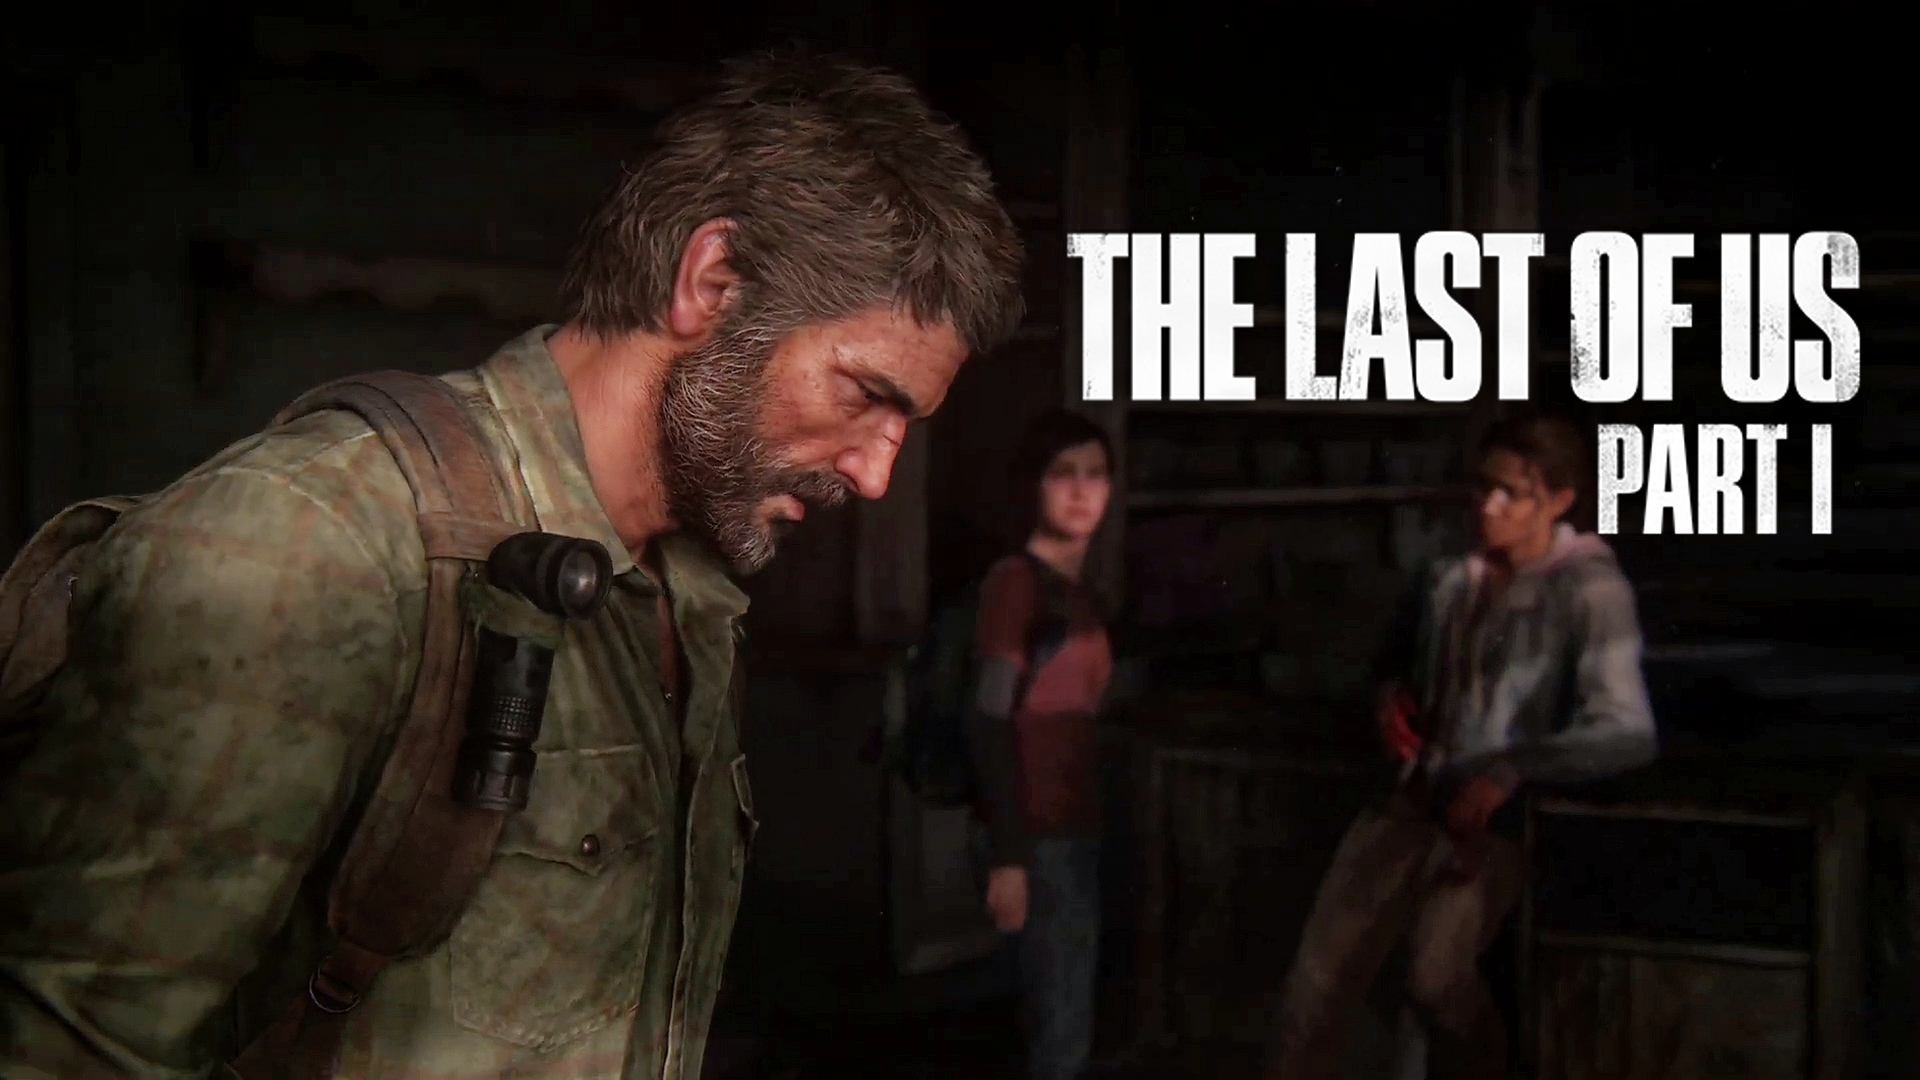 Last of us part 1 ps5. Джоэл the last of us Remake. Джоэл the last of us 1 Remake. Джоэл из the last of us.